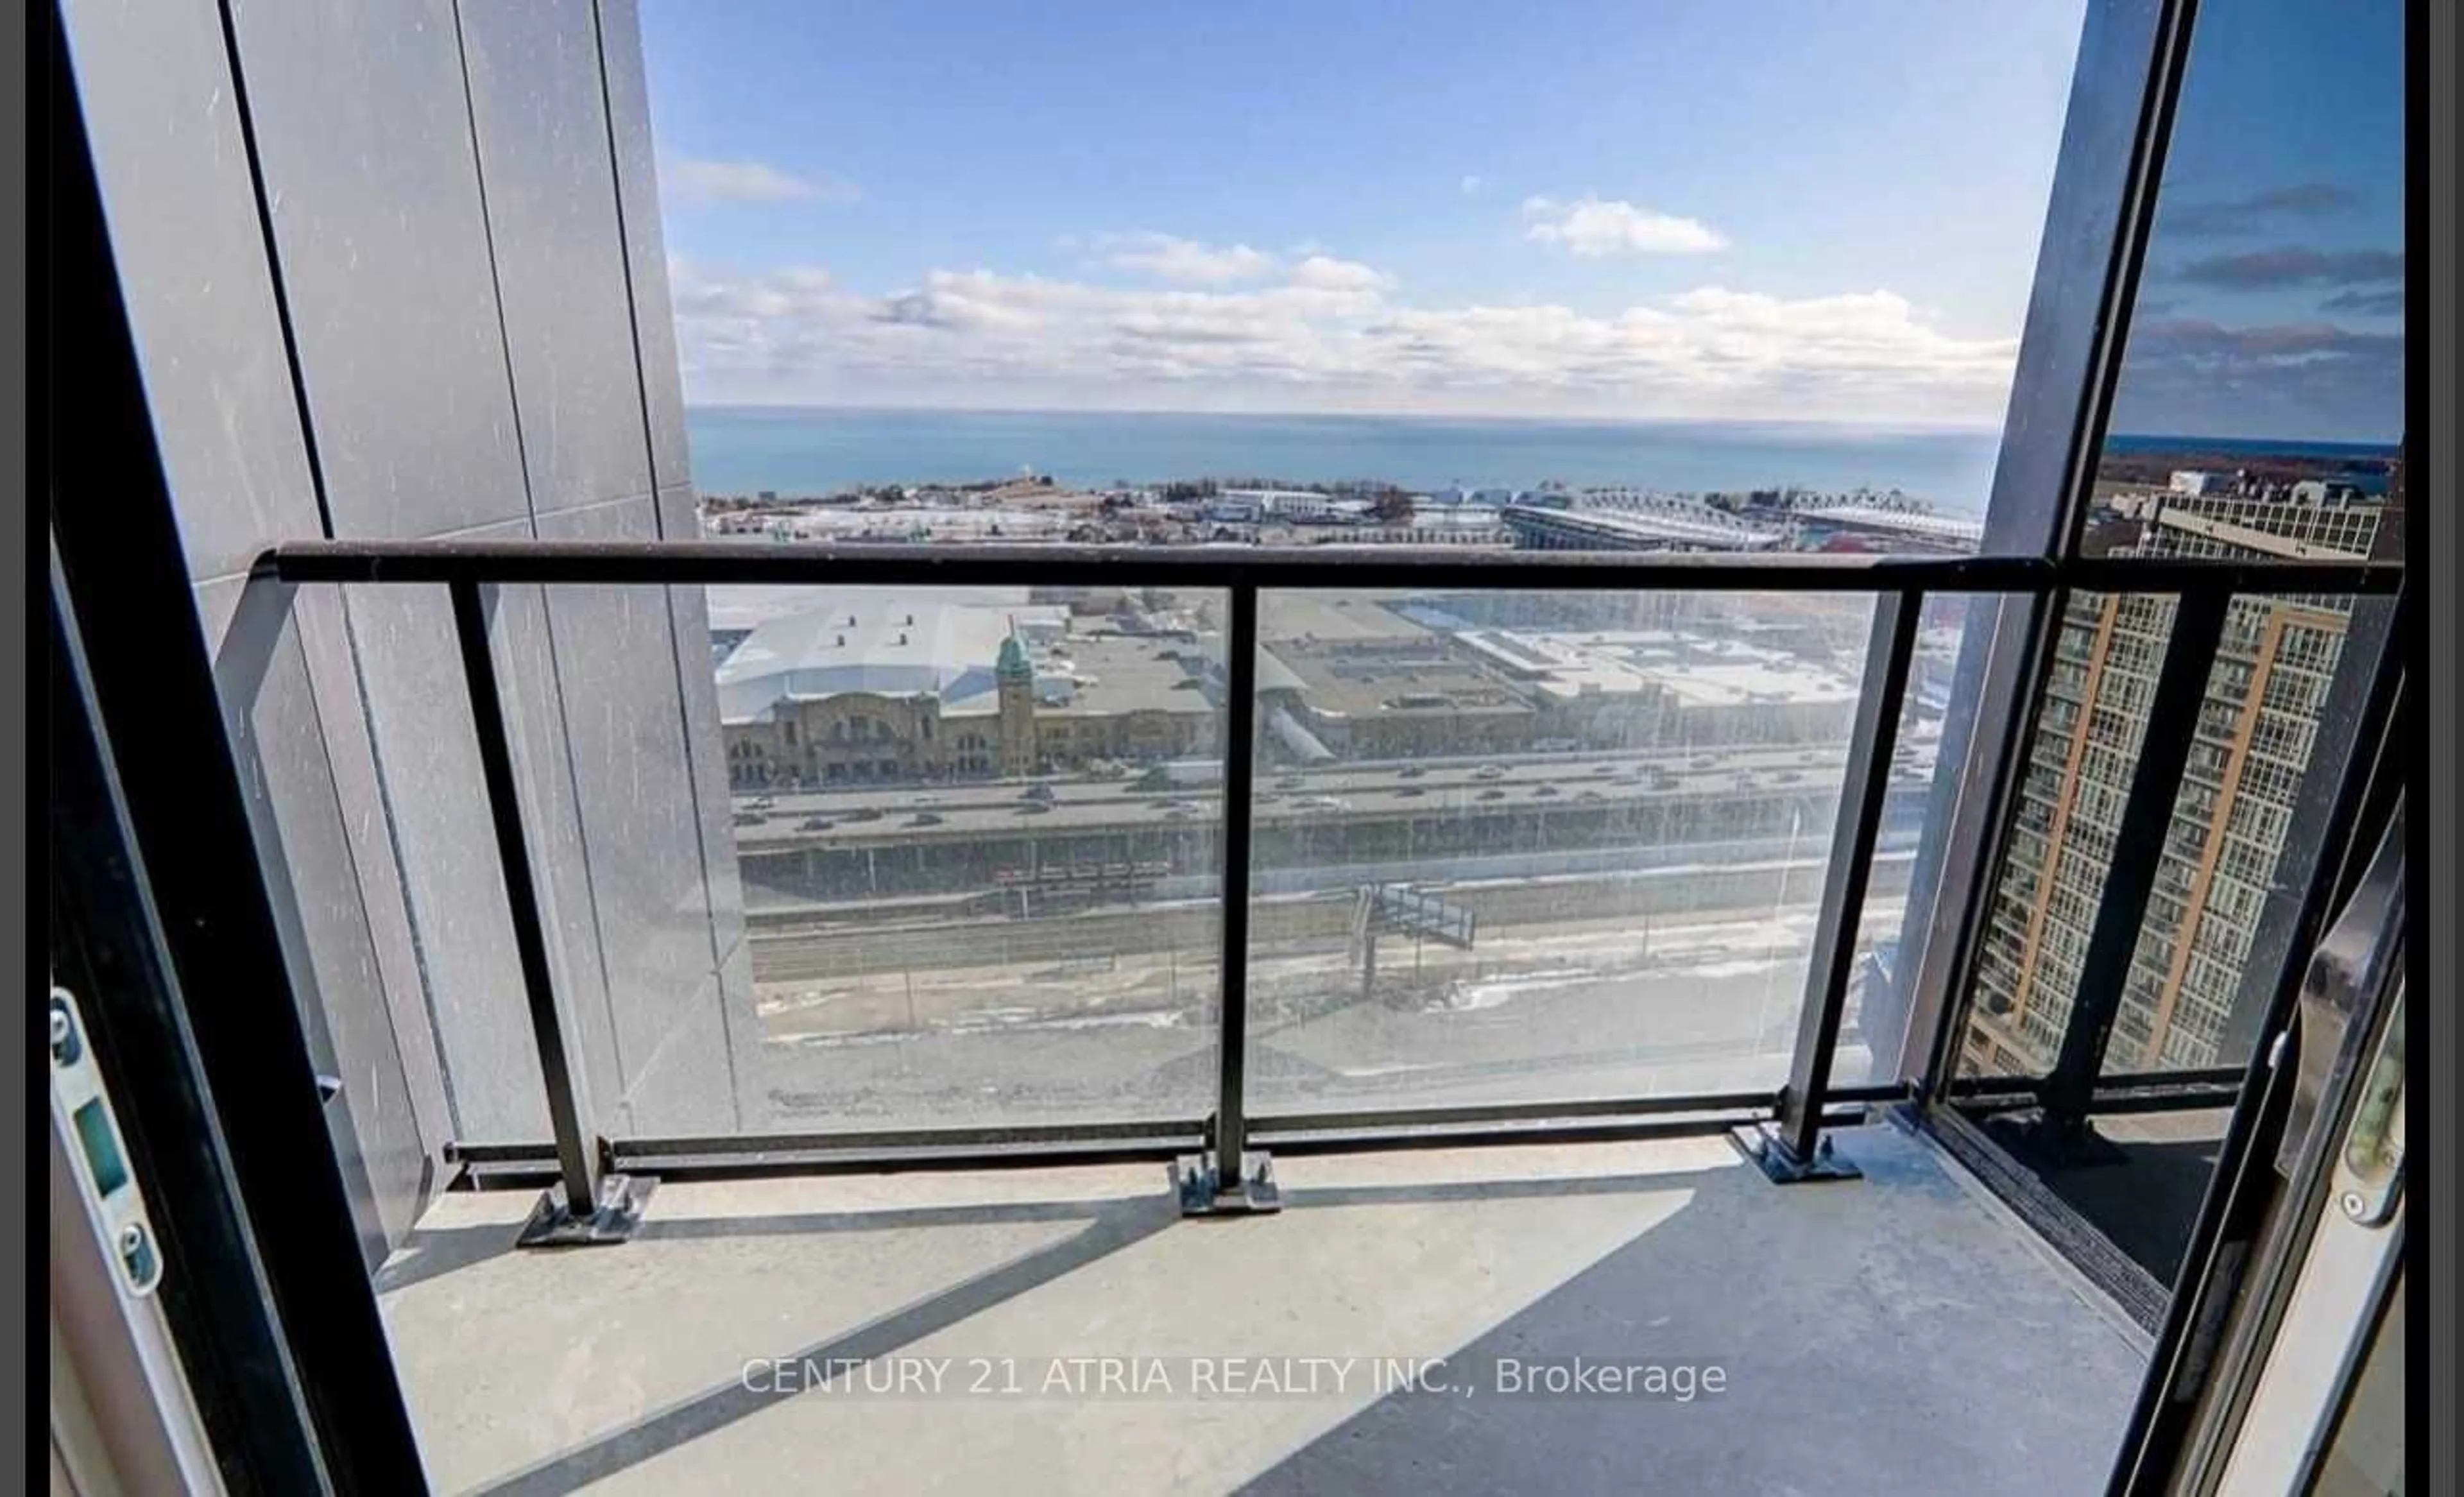 Balcony in the apartment for 135 East Liberty St #1803, Toronto Ontario M6K 3P6